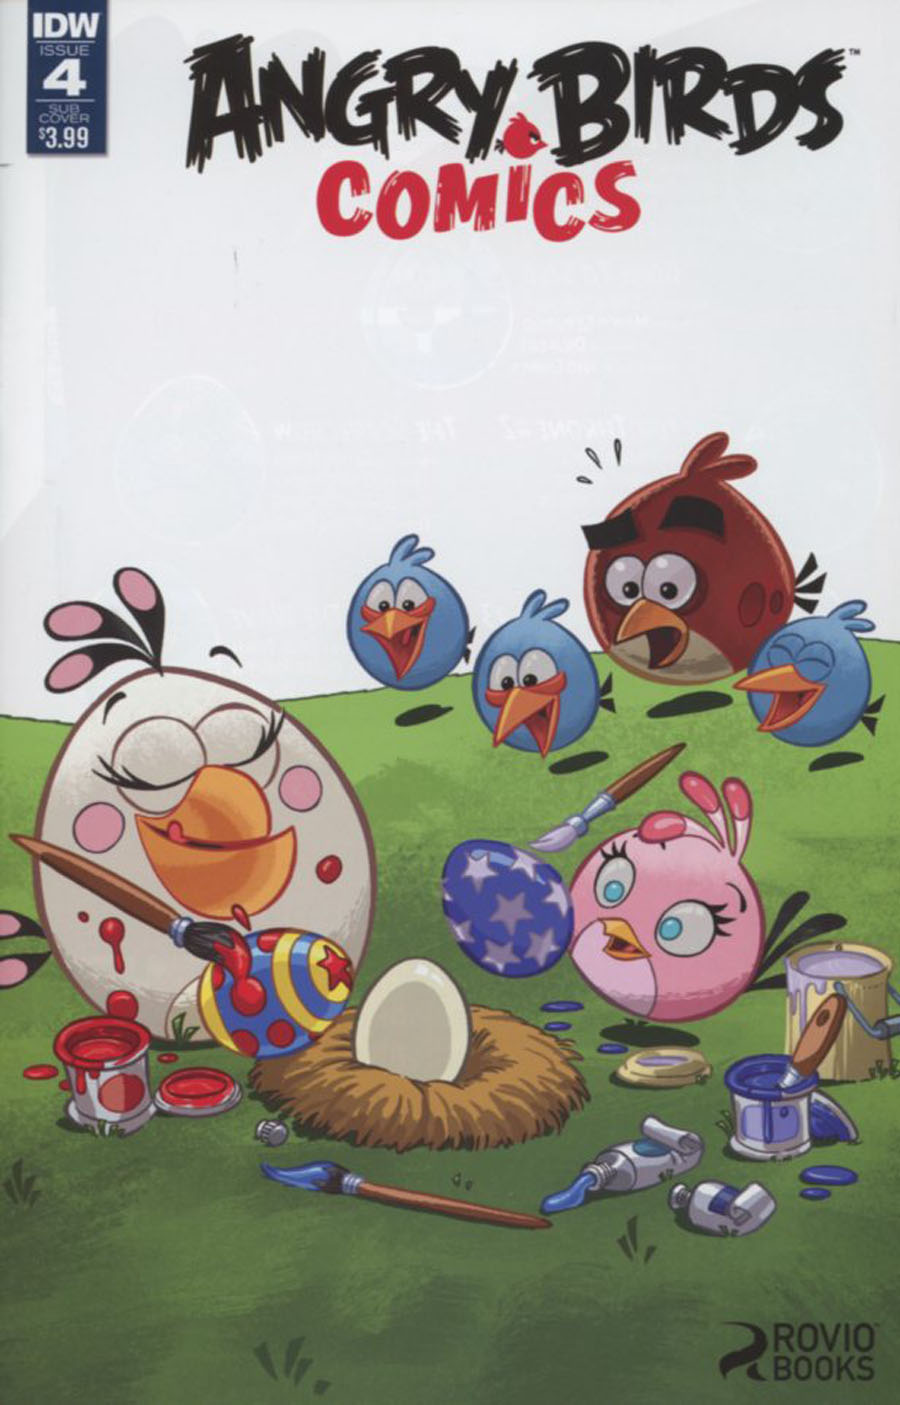 Angry Birds Comics Vol 2 #4 Cover B Variant Paco Rodriques Subscription Cover